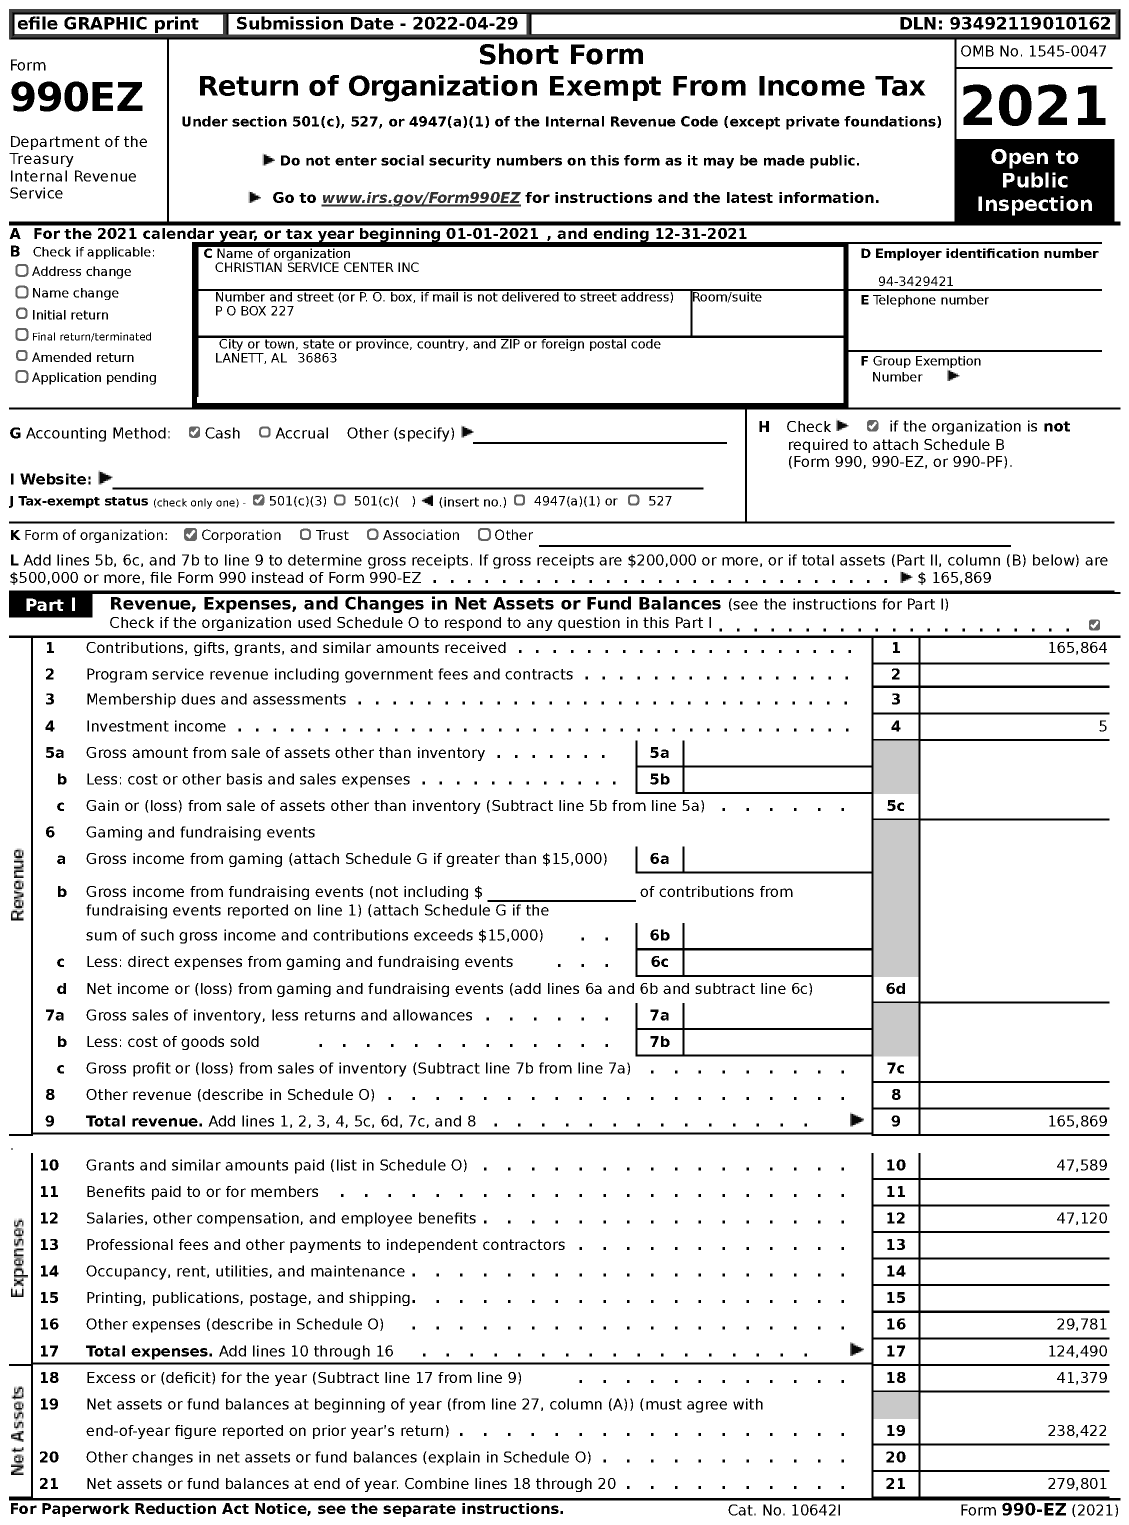 Image of first page of 2021 Form 990EZ for Christian Service Center